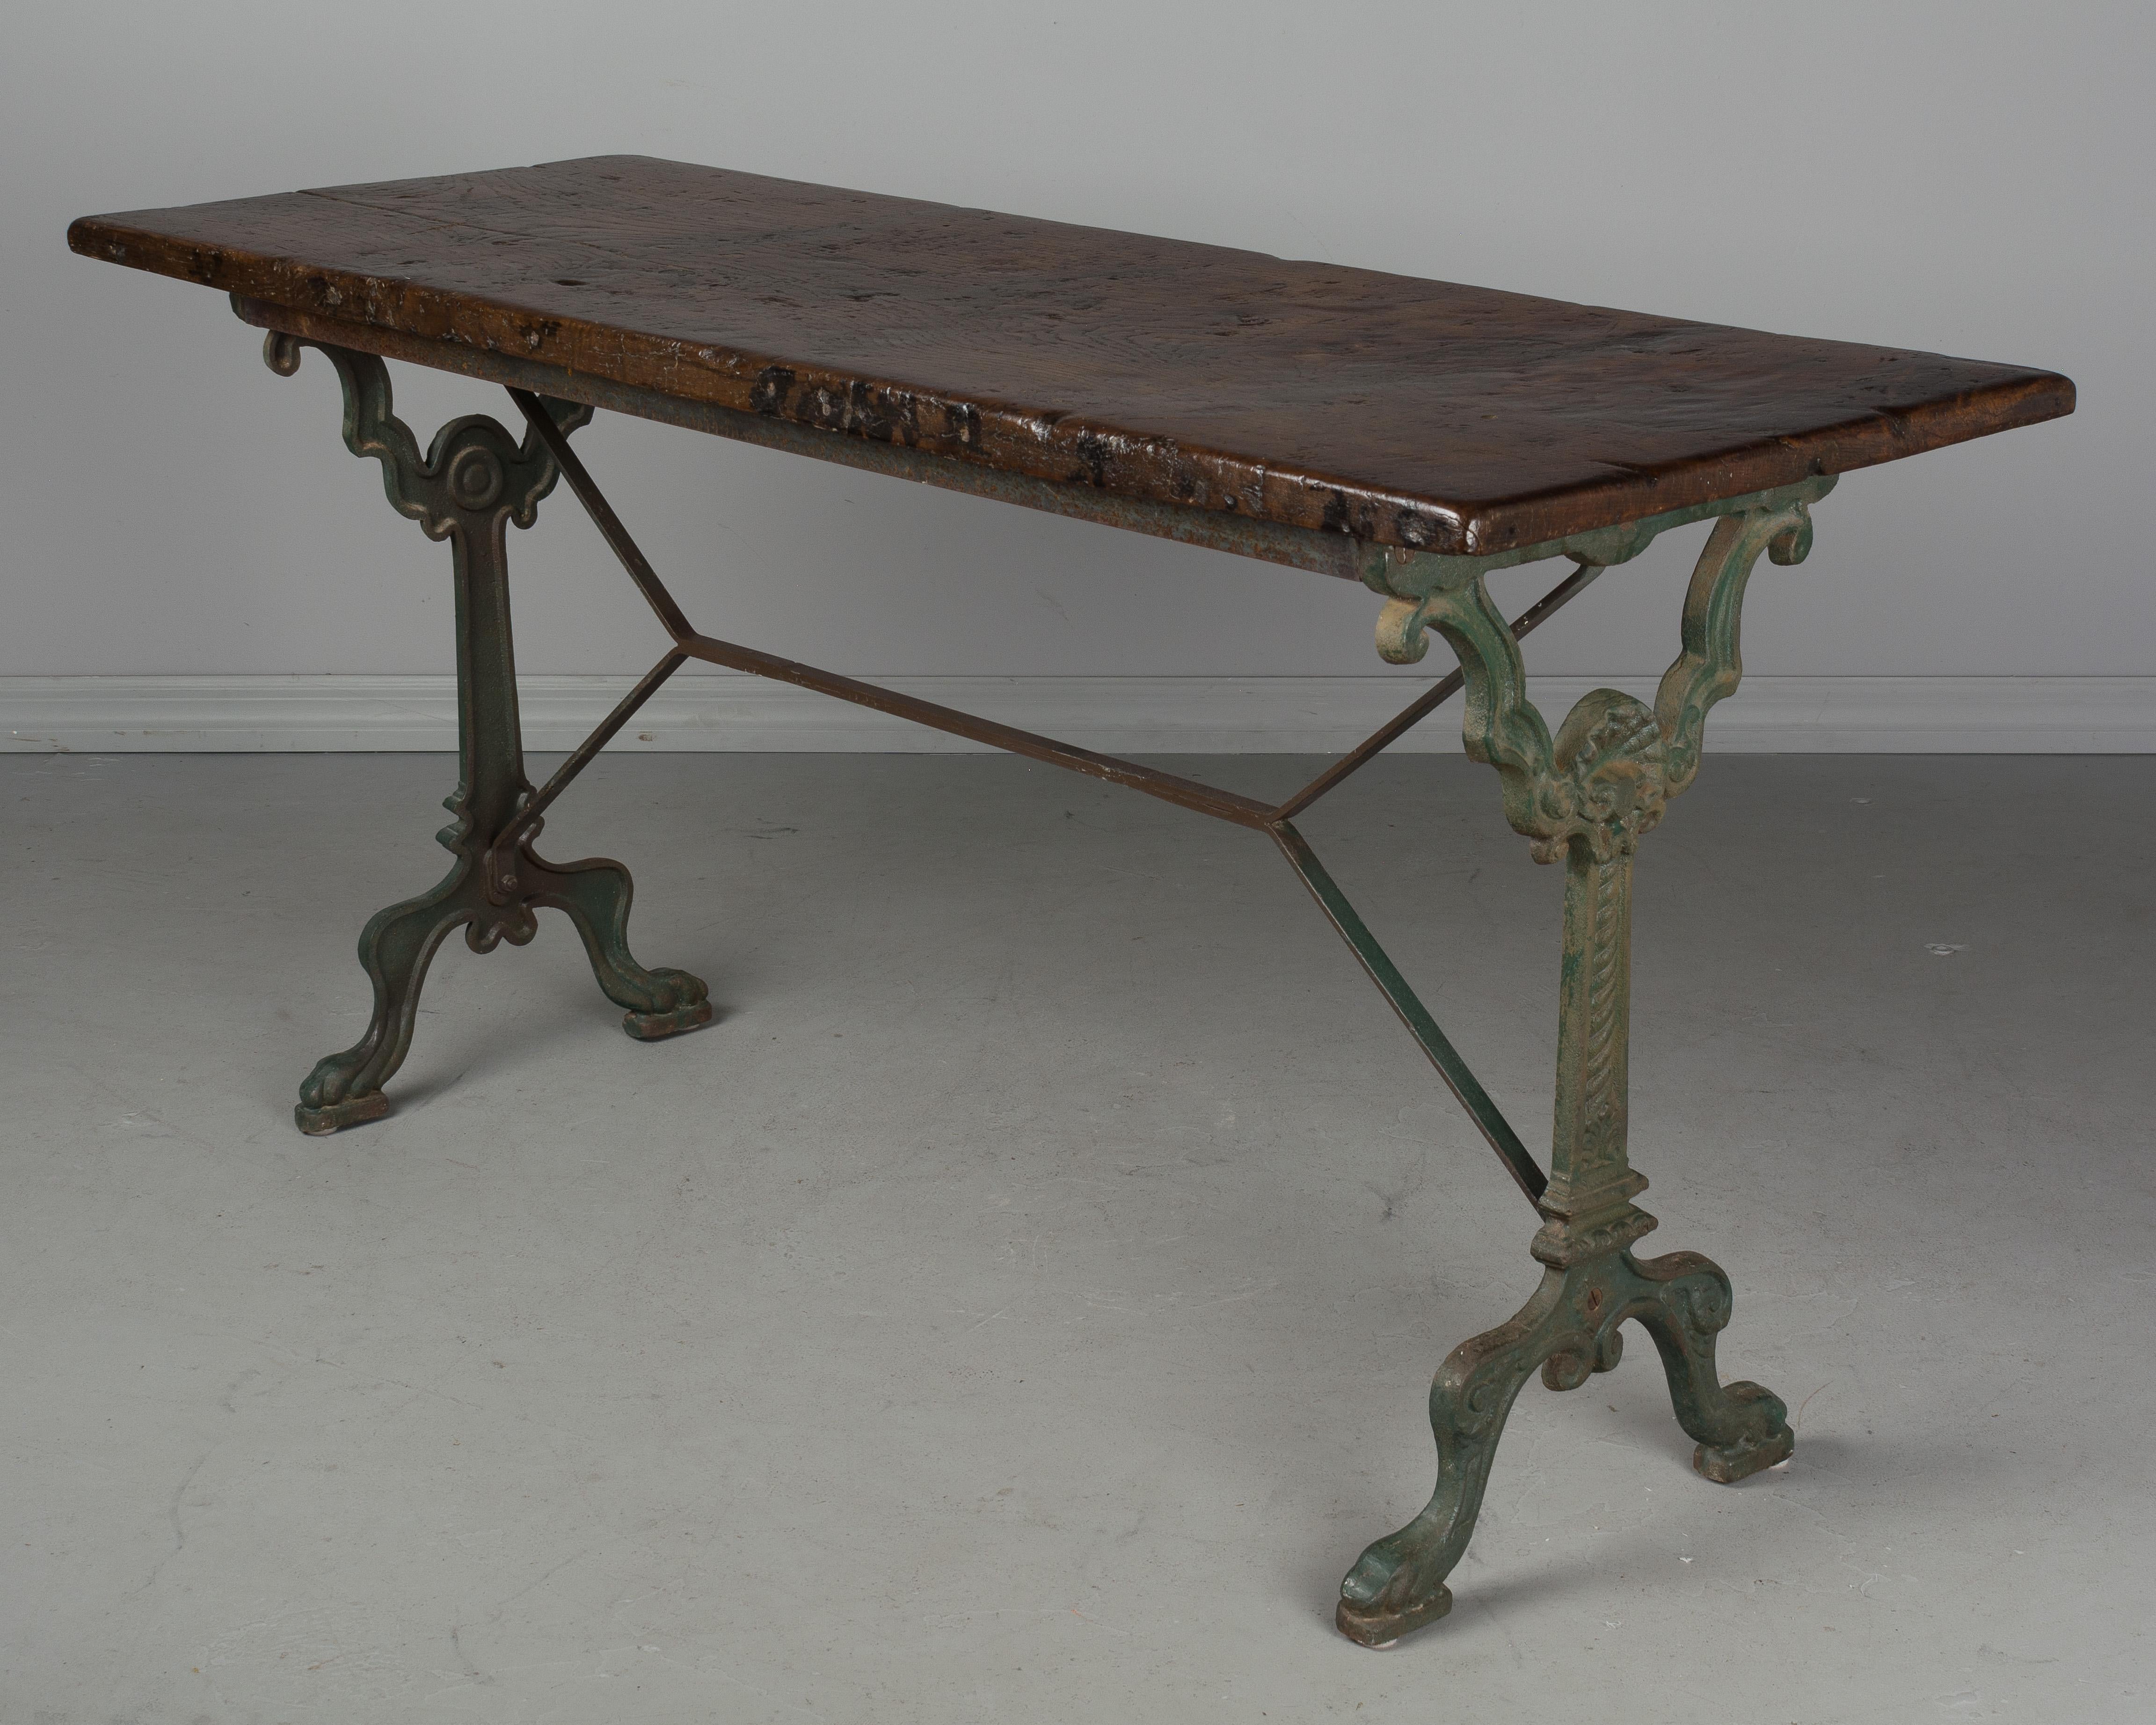 A 19th century French cast iron bistro table with rusty green painted patina and wood top. Top is as found with a beautiful one inch thick plank of old chestnut. Lovely character and patina of the wood with several knots and patterned grain. Waxed